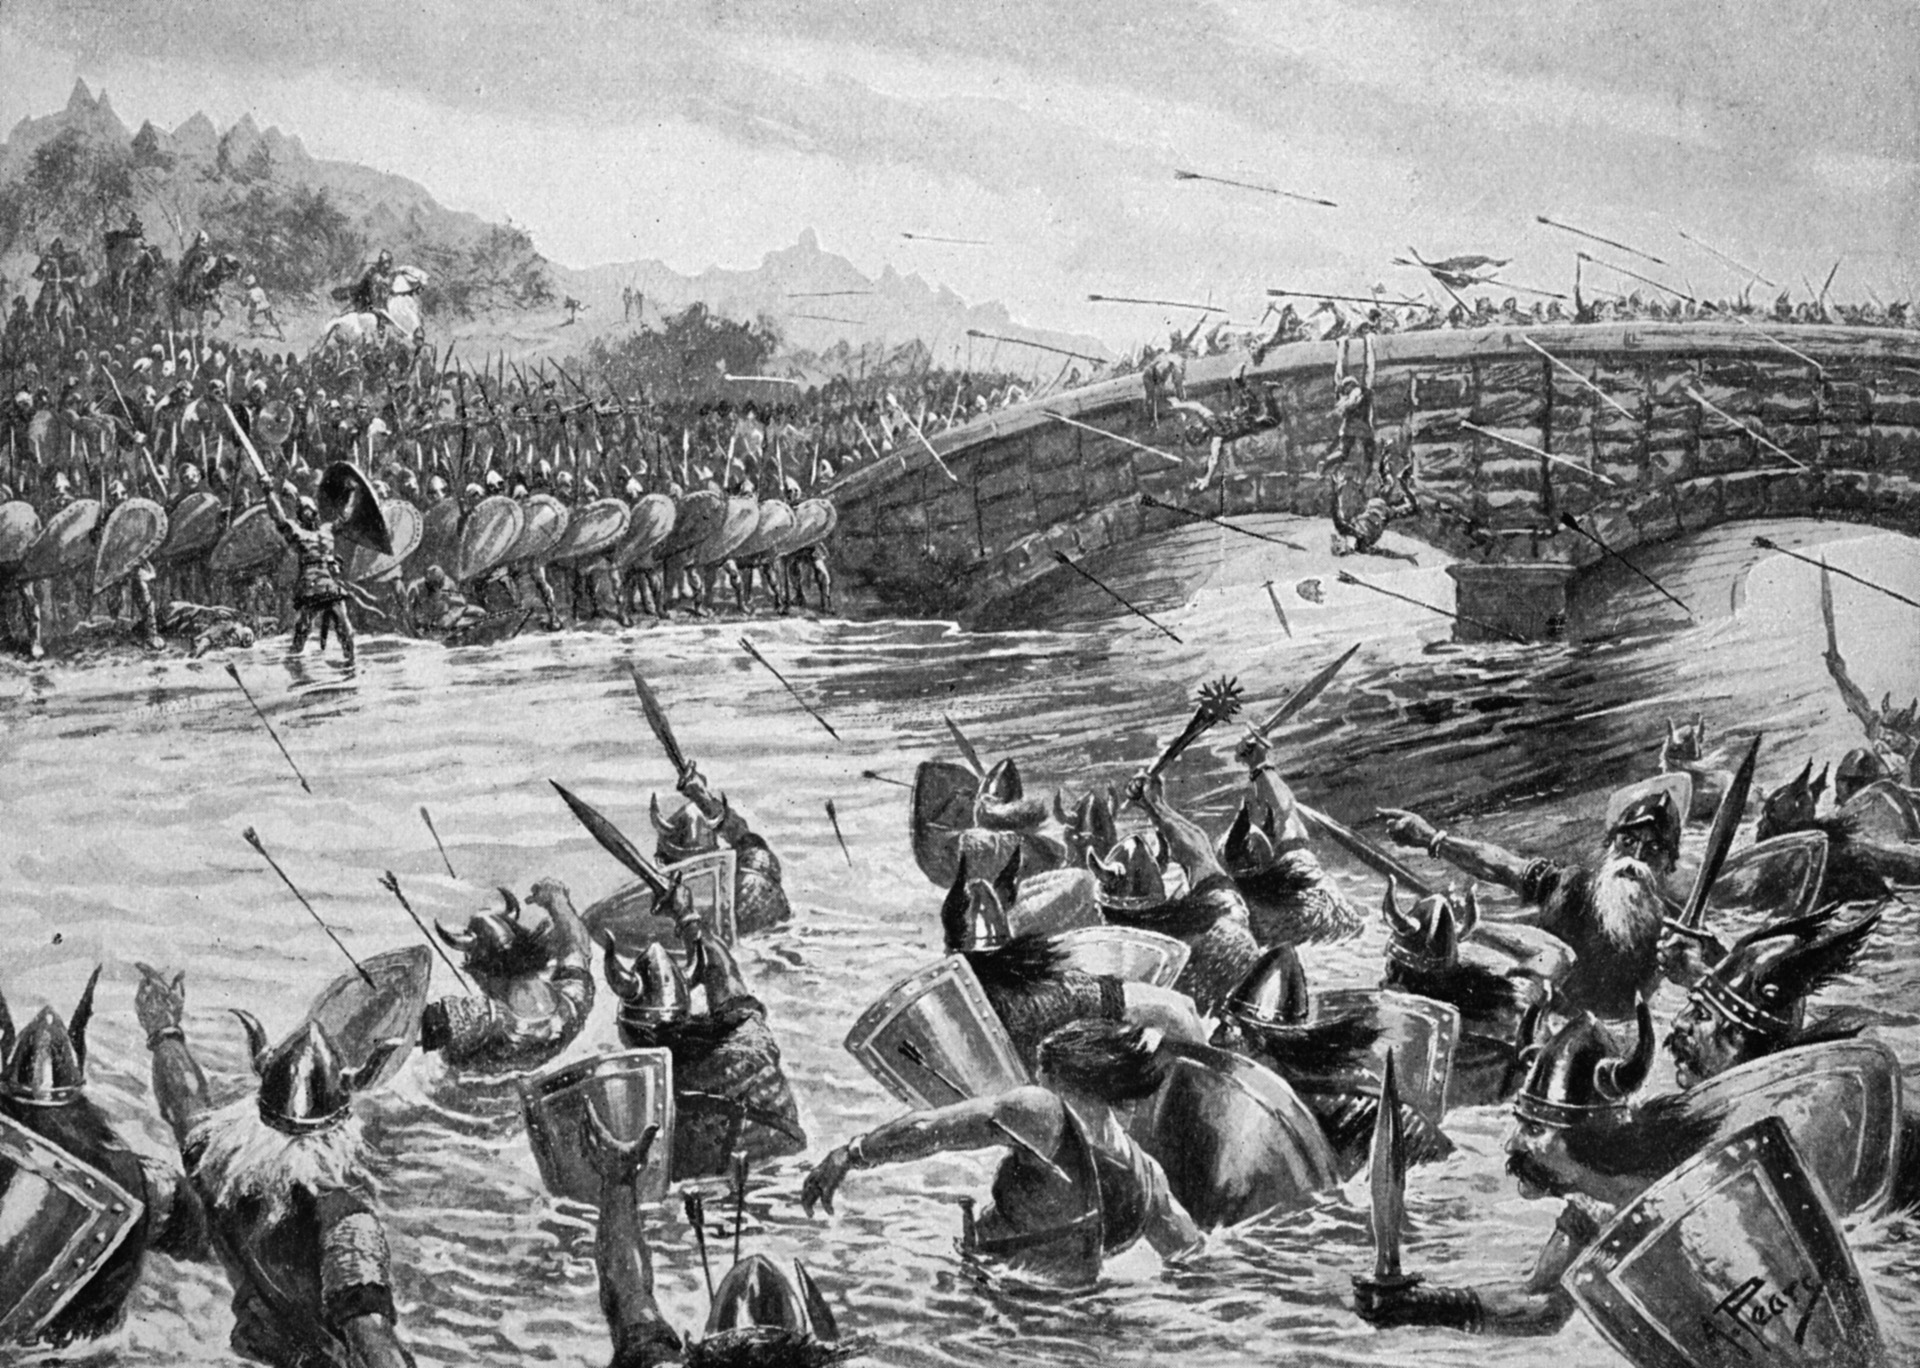 Danish raiders soundly defeated an Anglo-Saxon army at the Battle of Maldon in 991. The Danes were drawn to Maldon because gold and silver coins were minted at the Essex town.